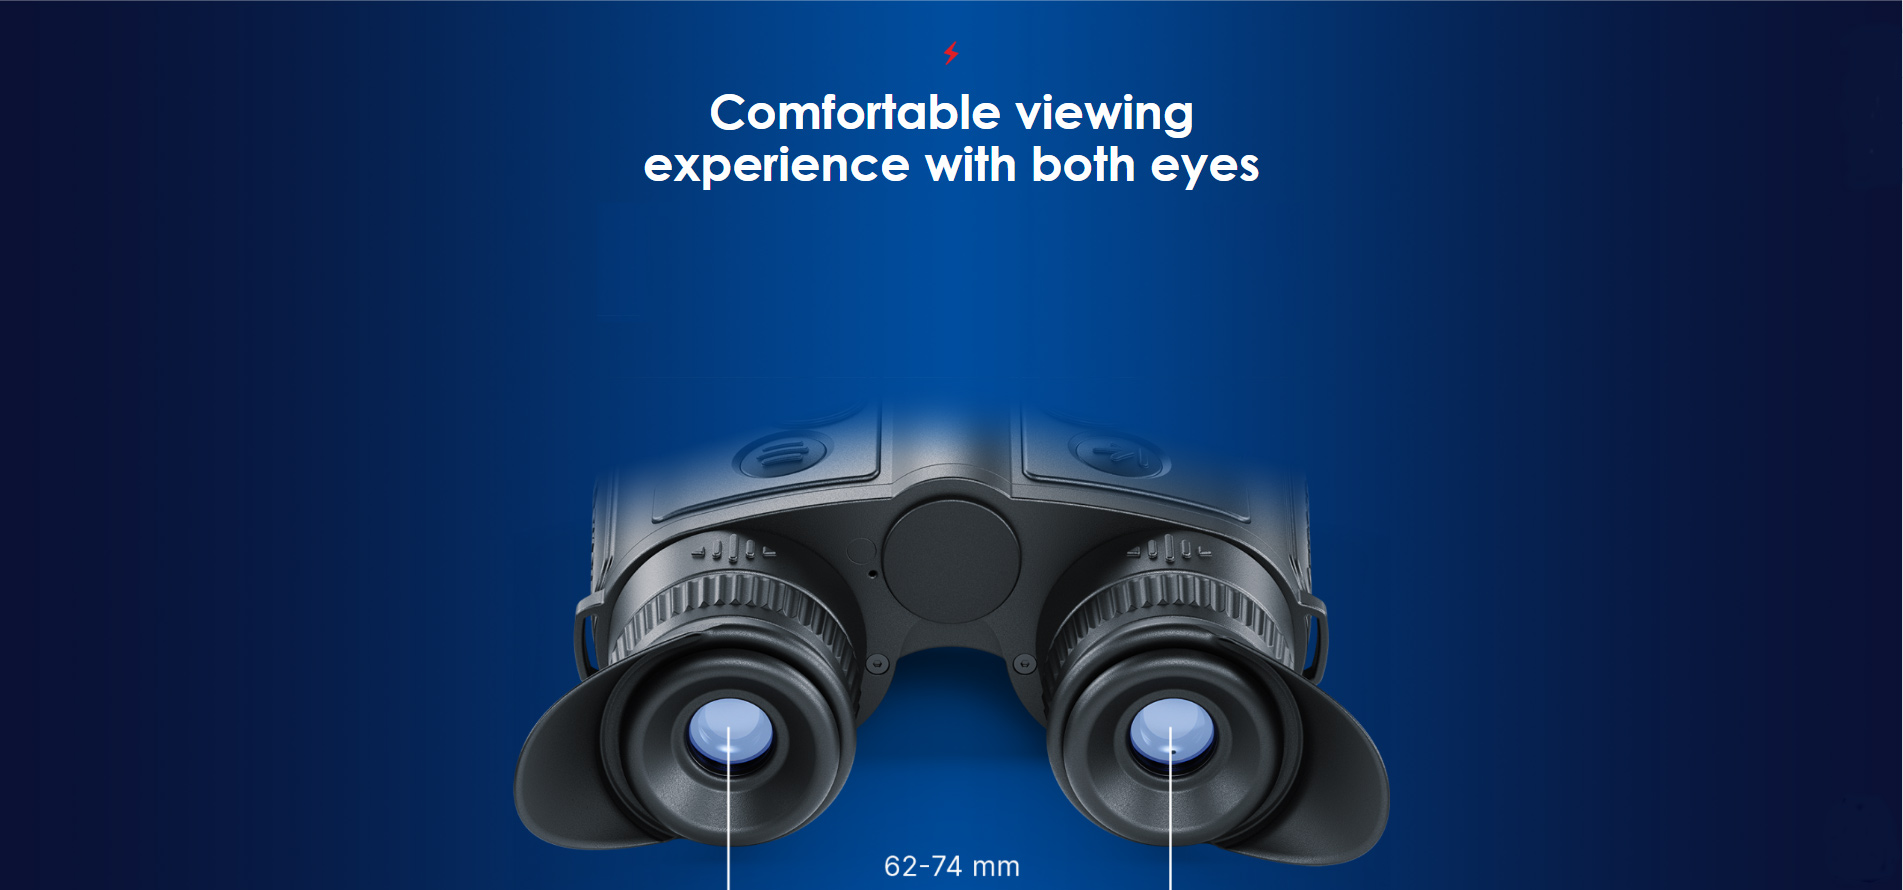 Pulsar PU-77481 Comfortable viewing experience with both eyes